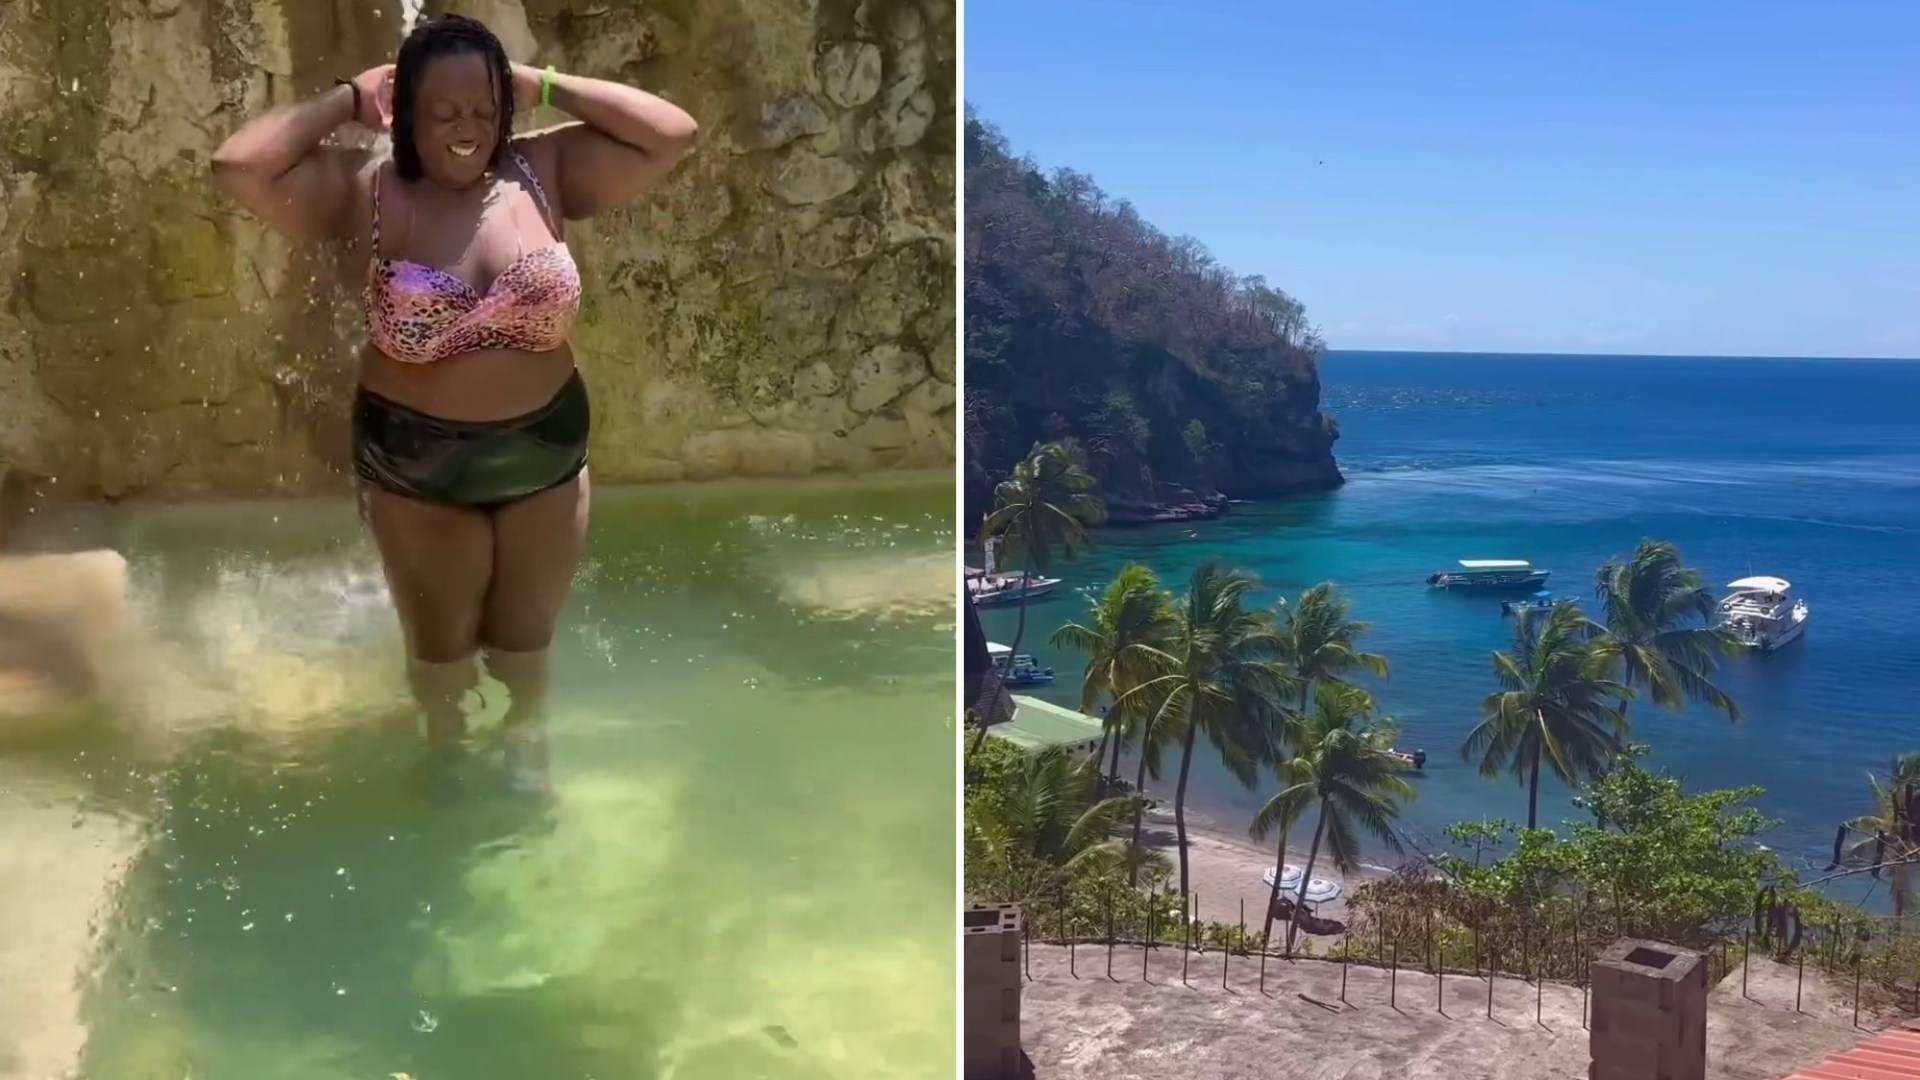 Uncover the Glamorous £2k a Night Getaway: Loose Women Star Bares All in Bikini at Stunning St. Lucia Waterfall